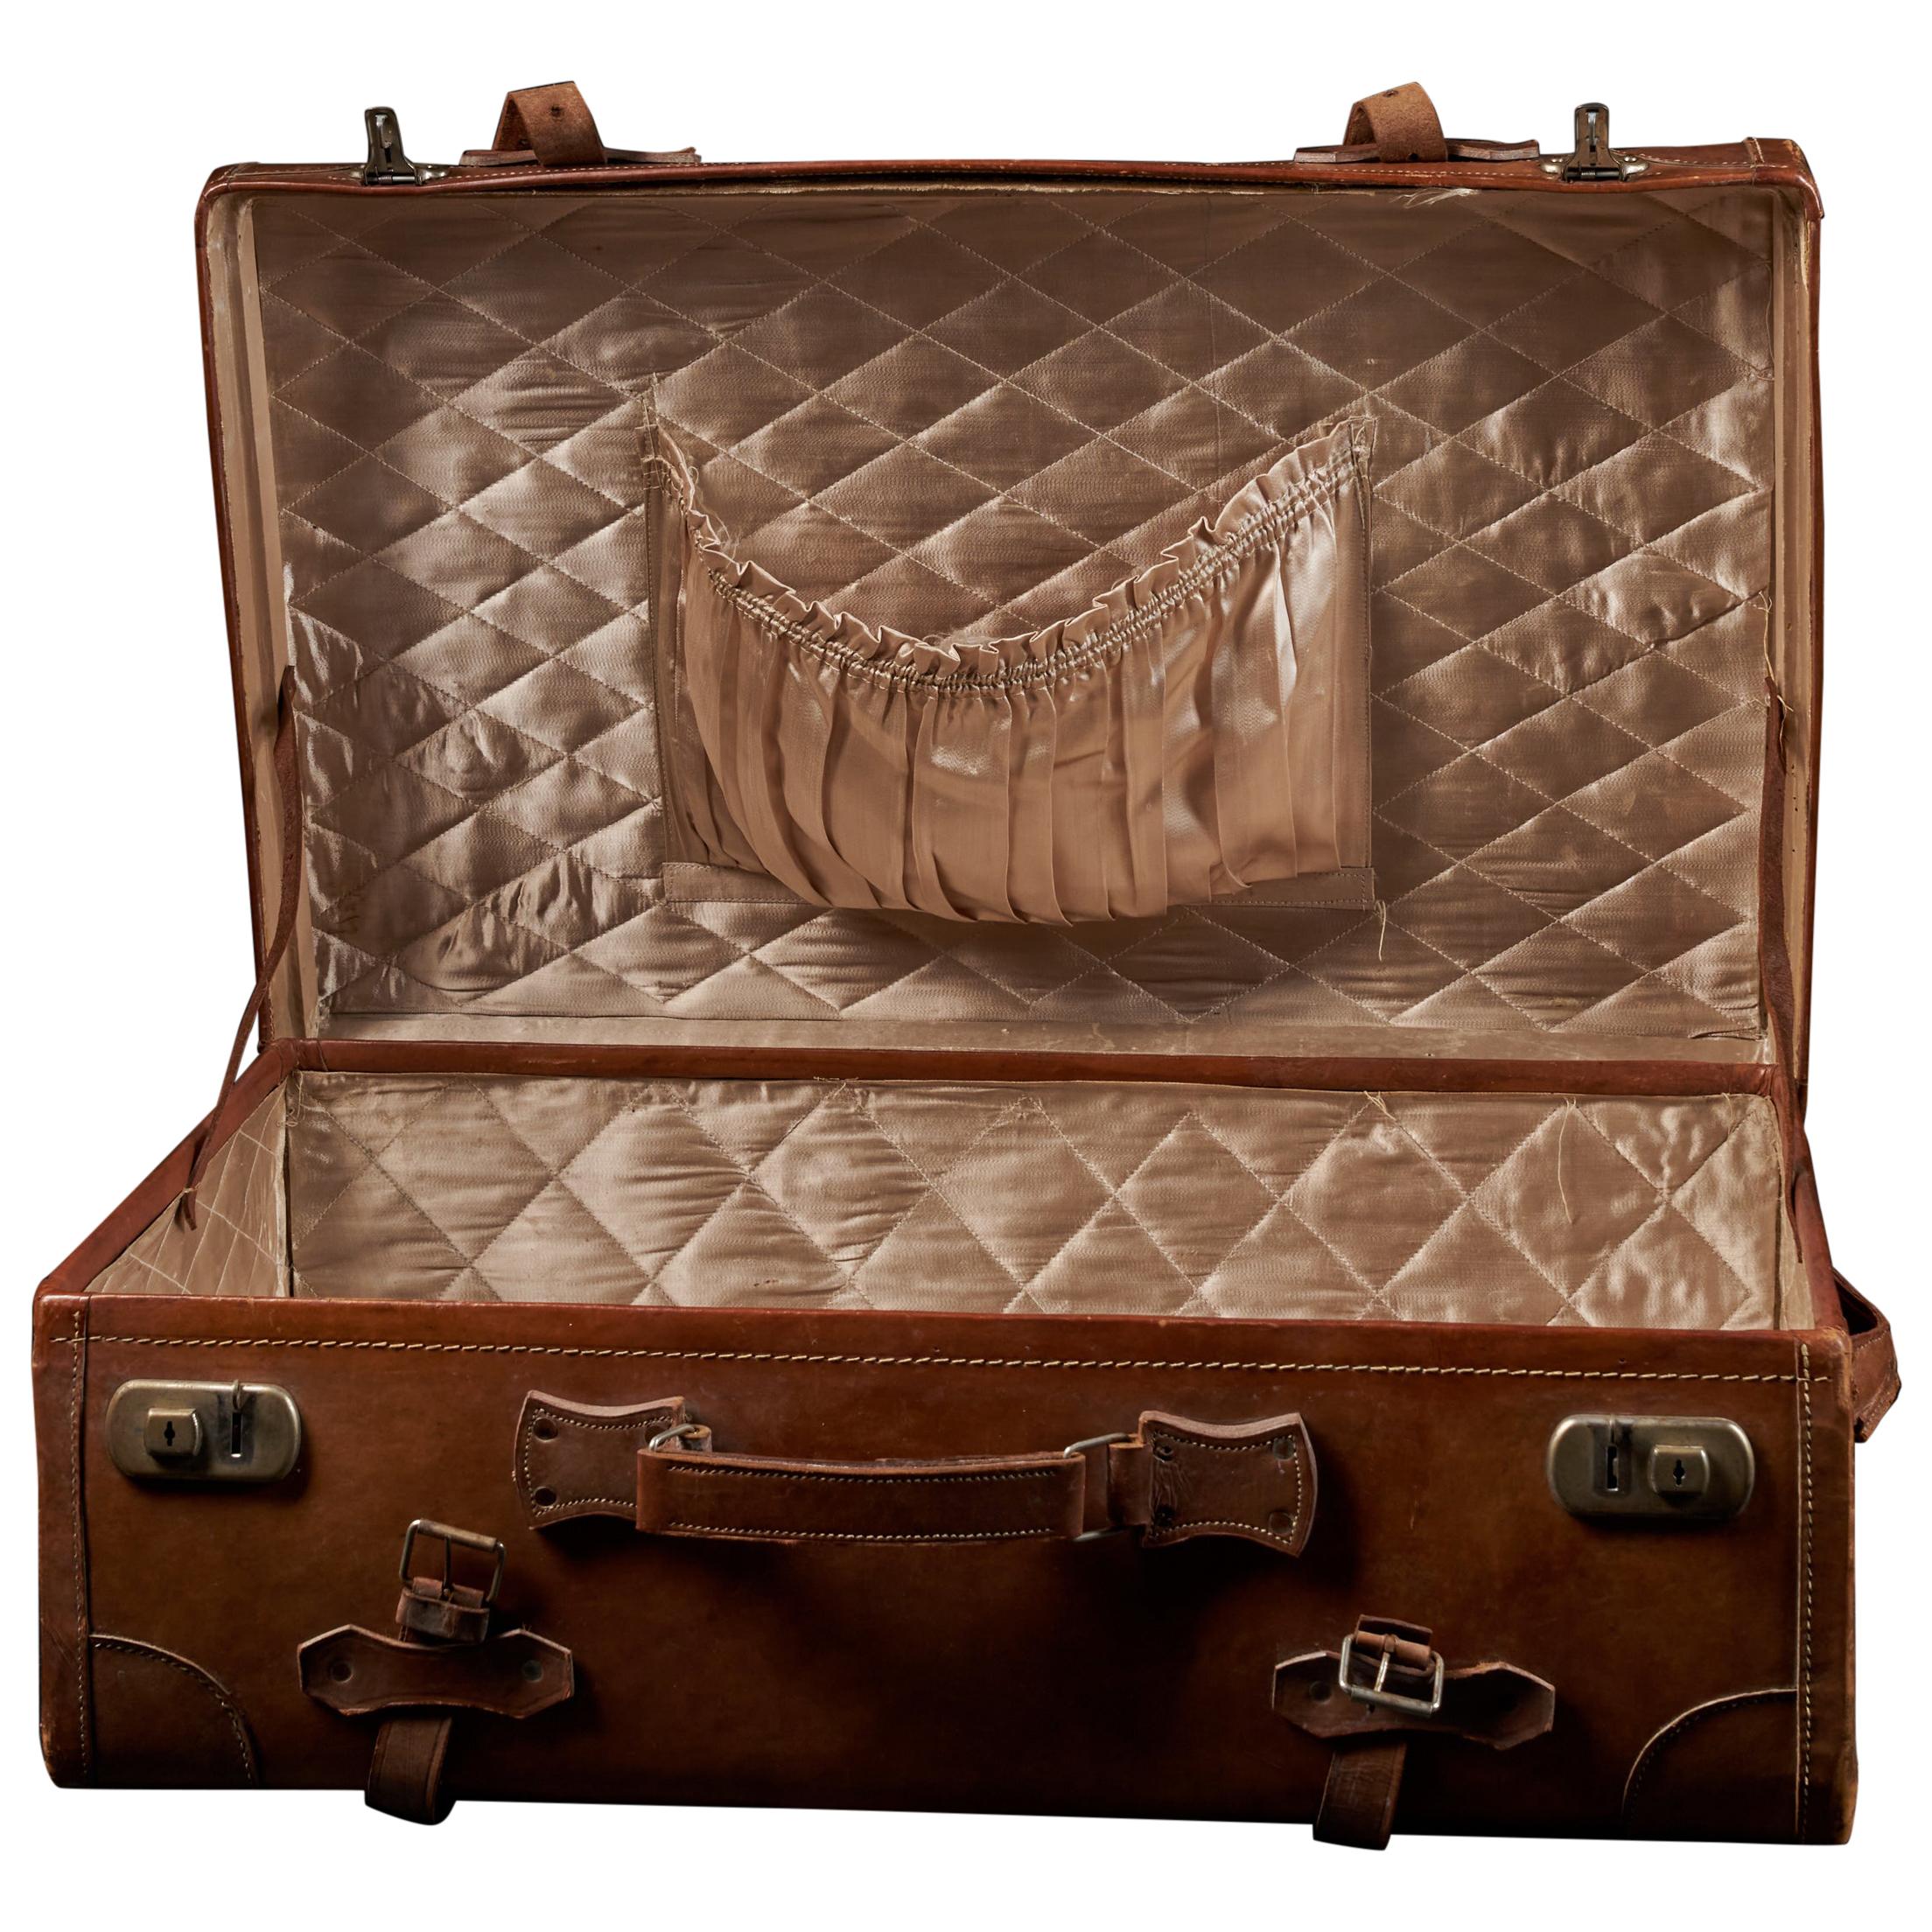 English Made Gentleman's Fine Leather Suitcase